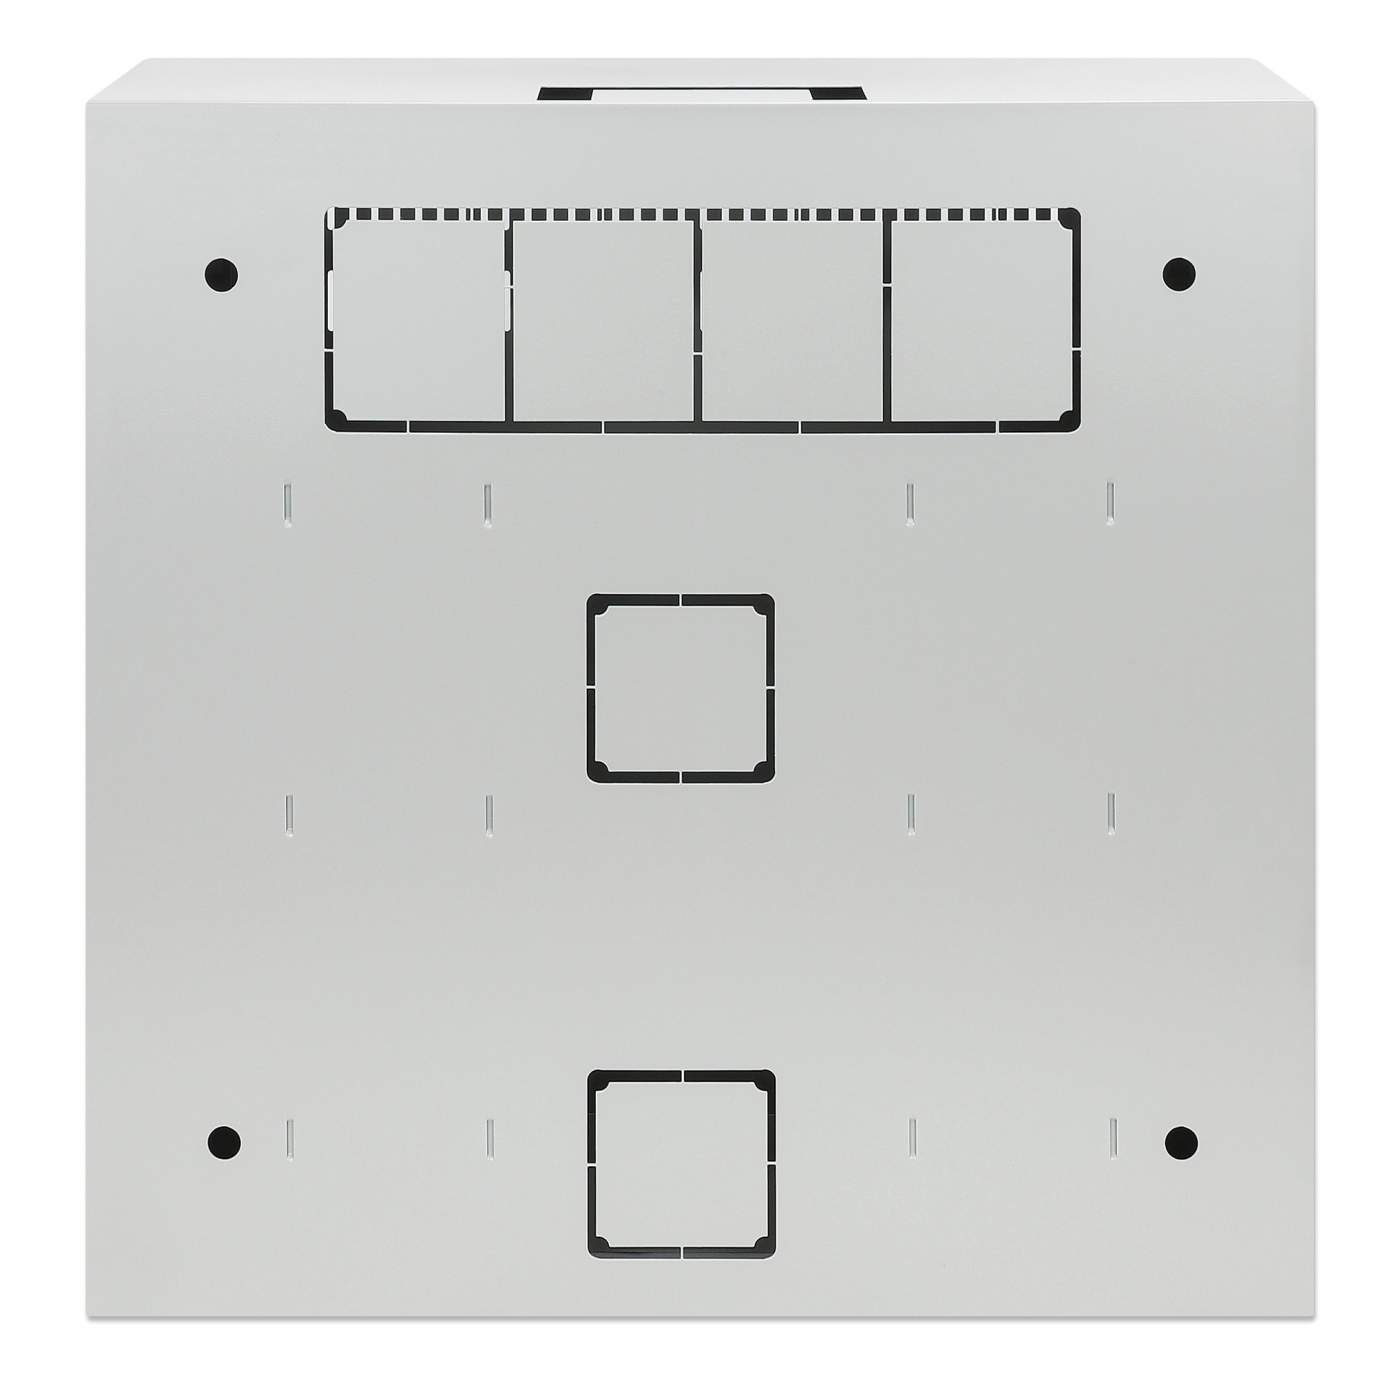 Low-Profile 19" Wall Mount Cabinet with 4U Horizontal and 2U Vertical Rails Image 4